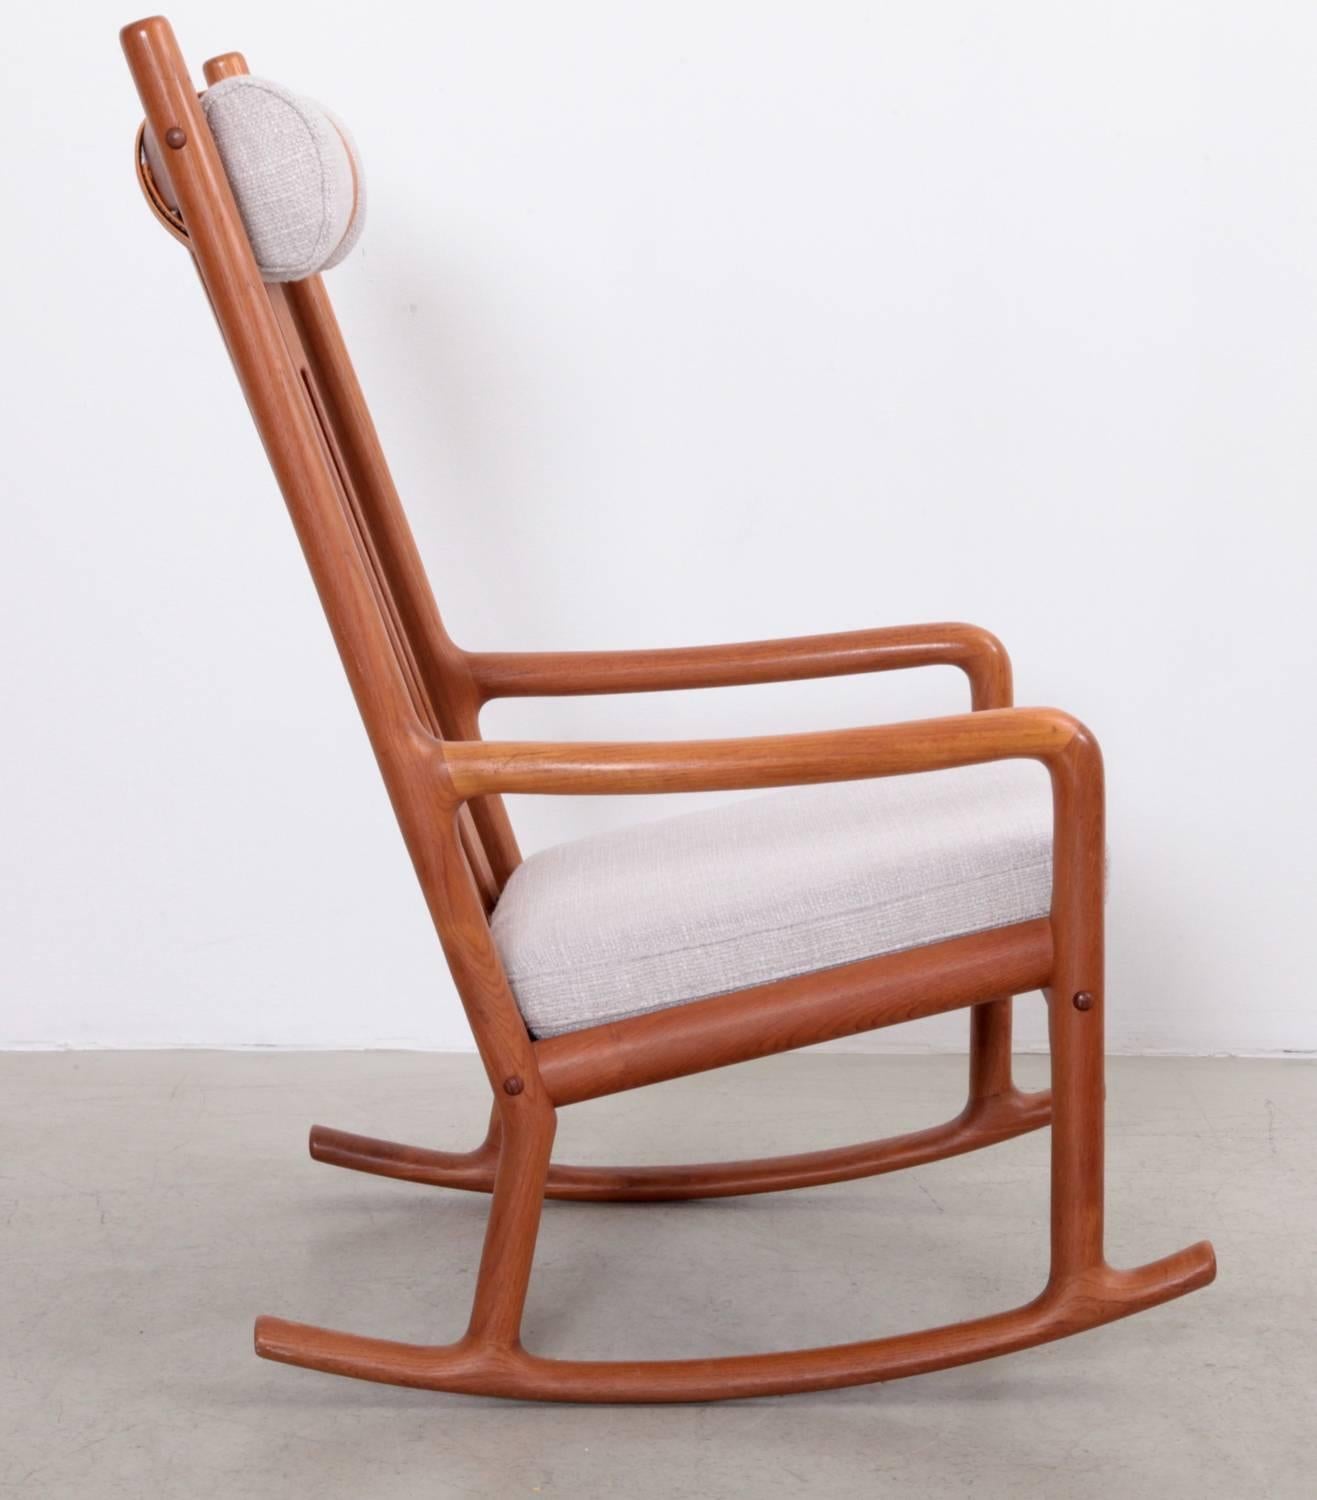 Well made rocking chair by Jacob Kjær in excellent condition with new Mark Alexander fabric.

